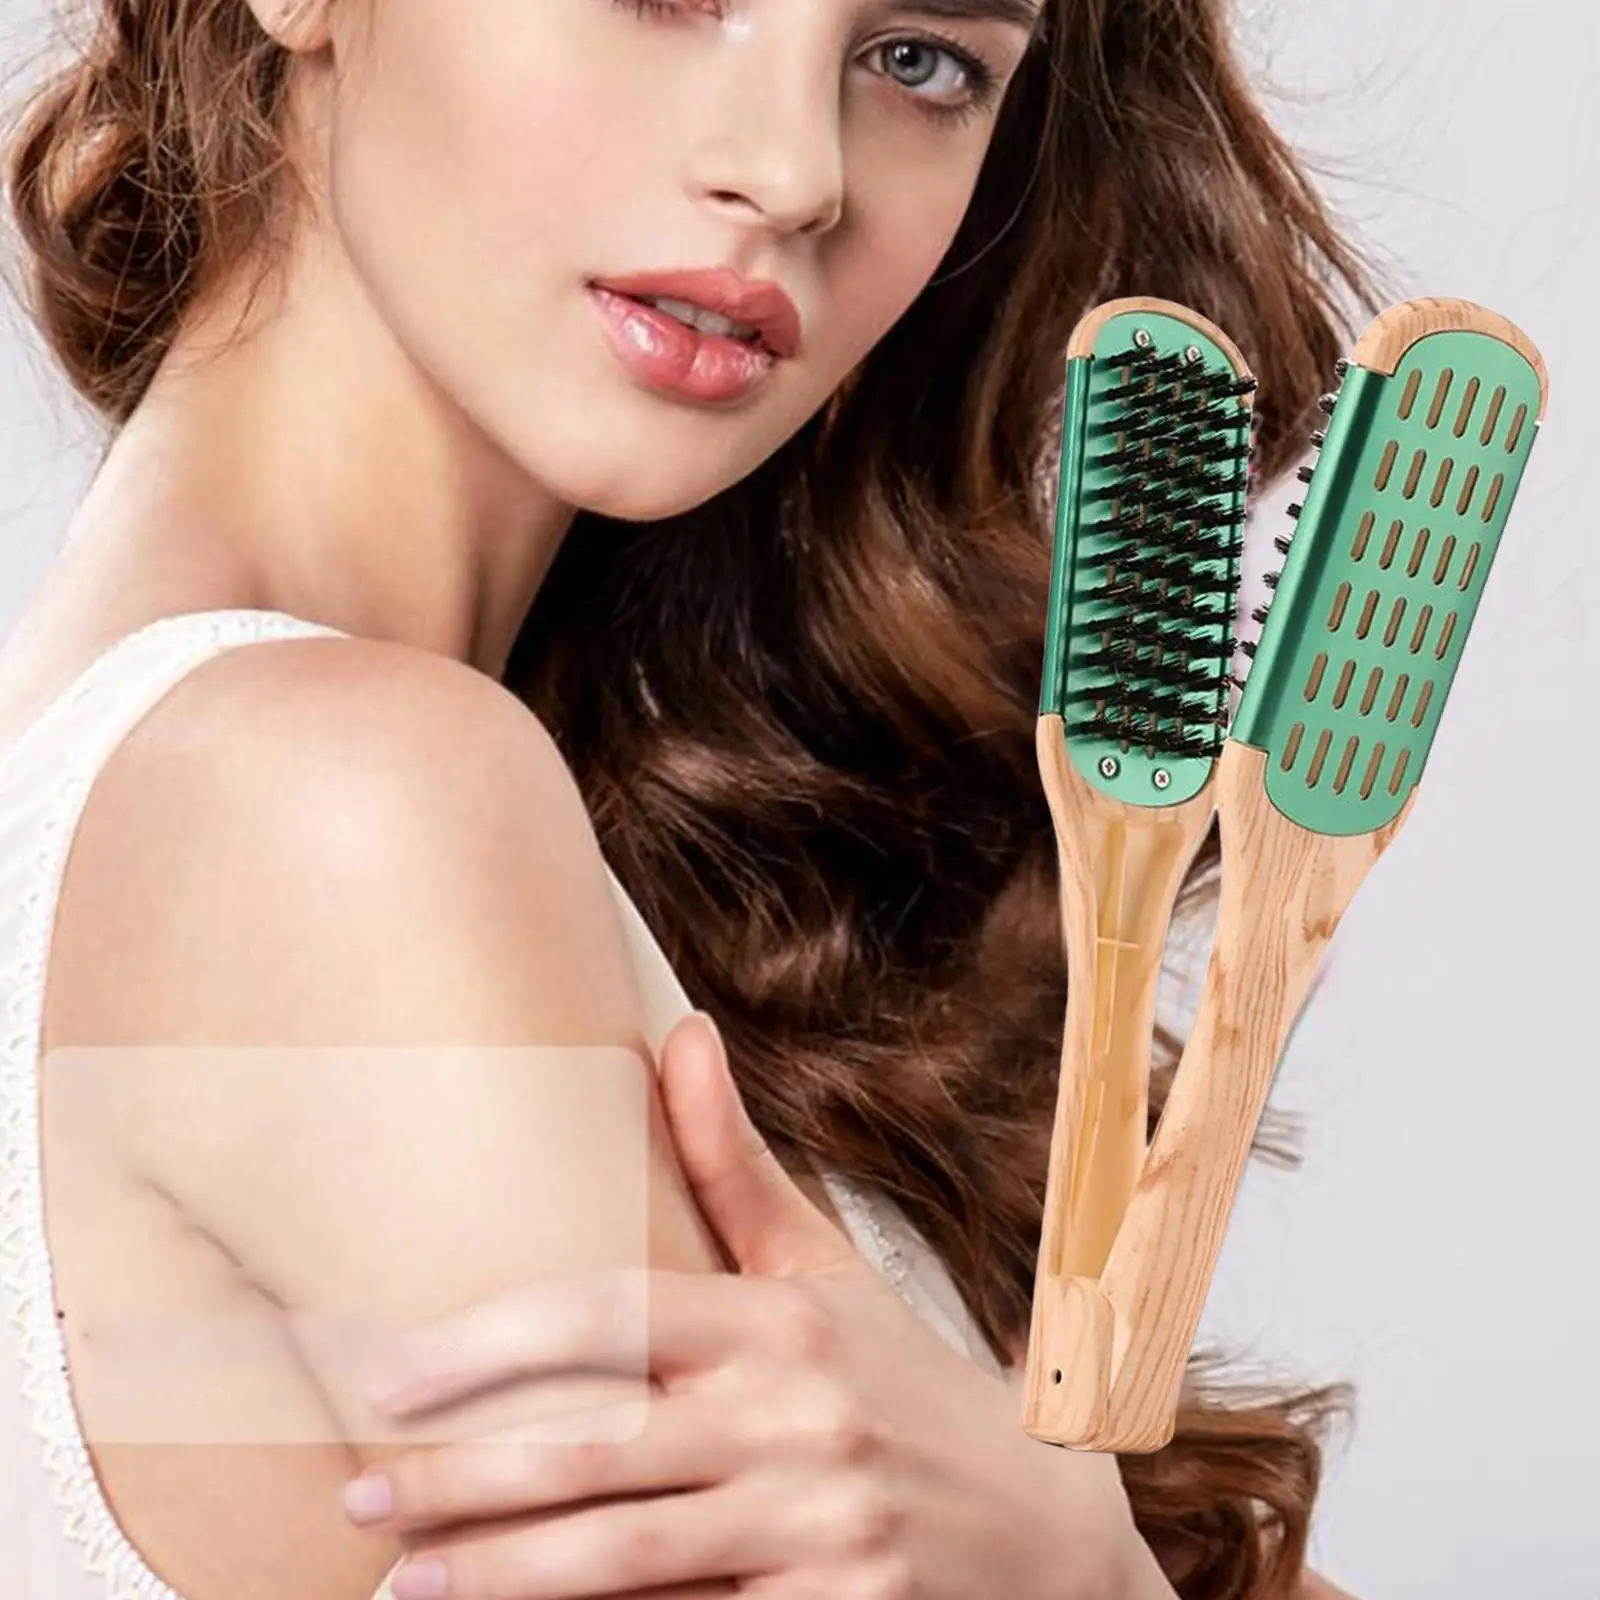 Hair Brush Comb Straightener Straightening Bristle Wooden Handle Professional Hair Styling Tool for Salon Home Hair Style Travel